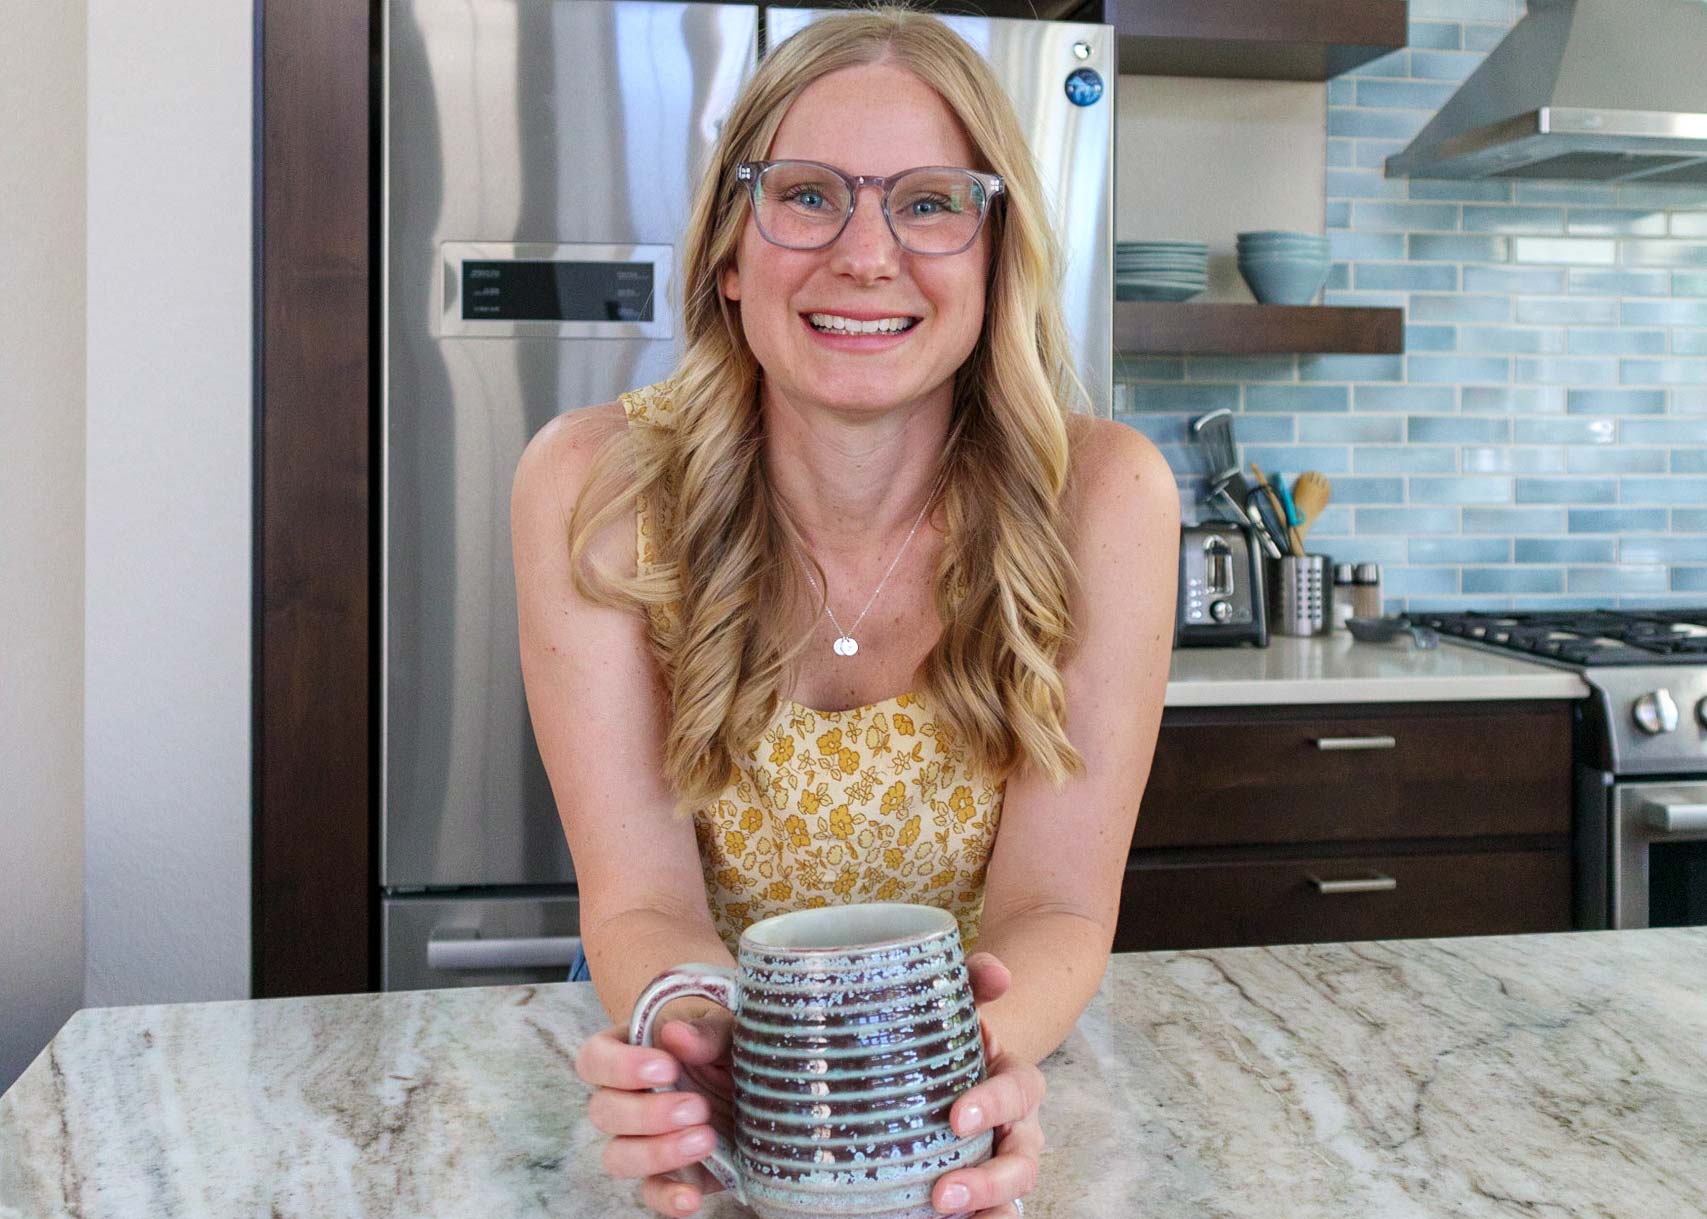 Functional and Integrative Medicine Provider Alison Percowycz, MSN, FNP-C smiling with a ceramic mug in her hand and a kitchen in the background in Denver Colorado